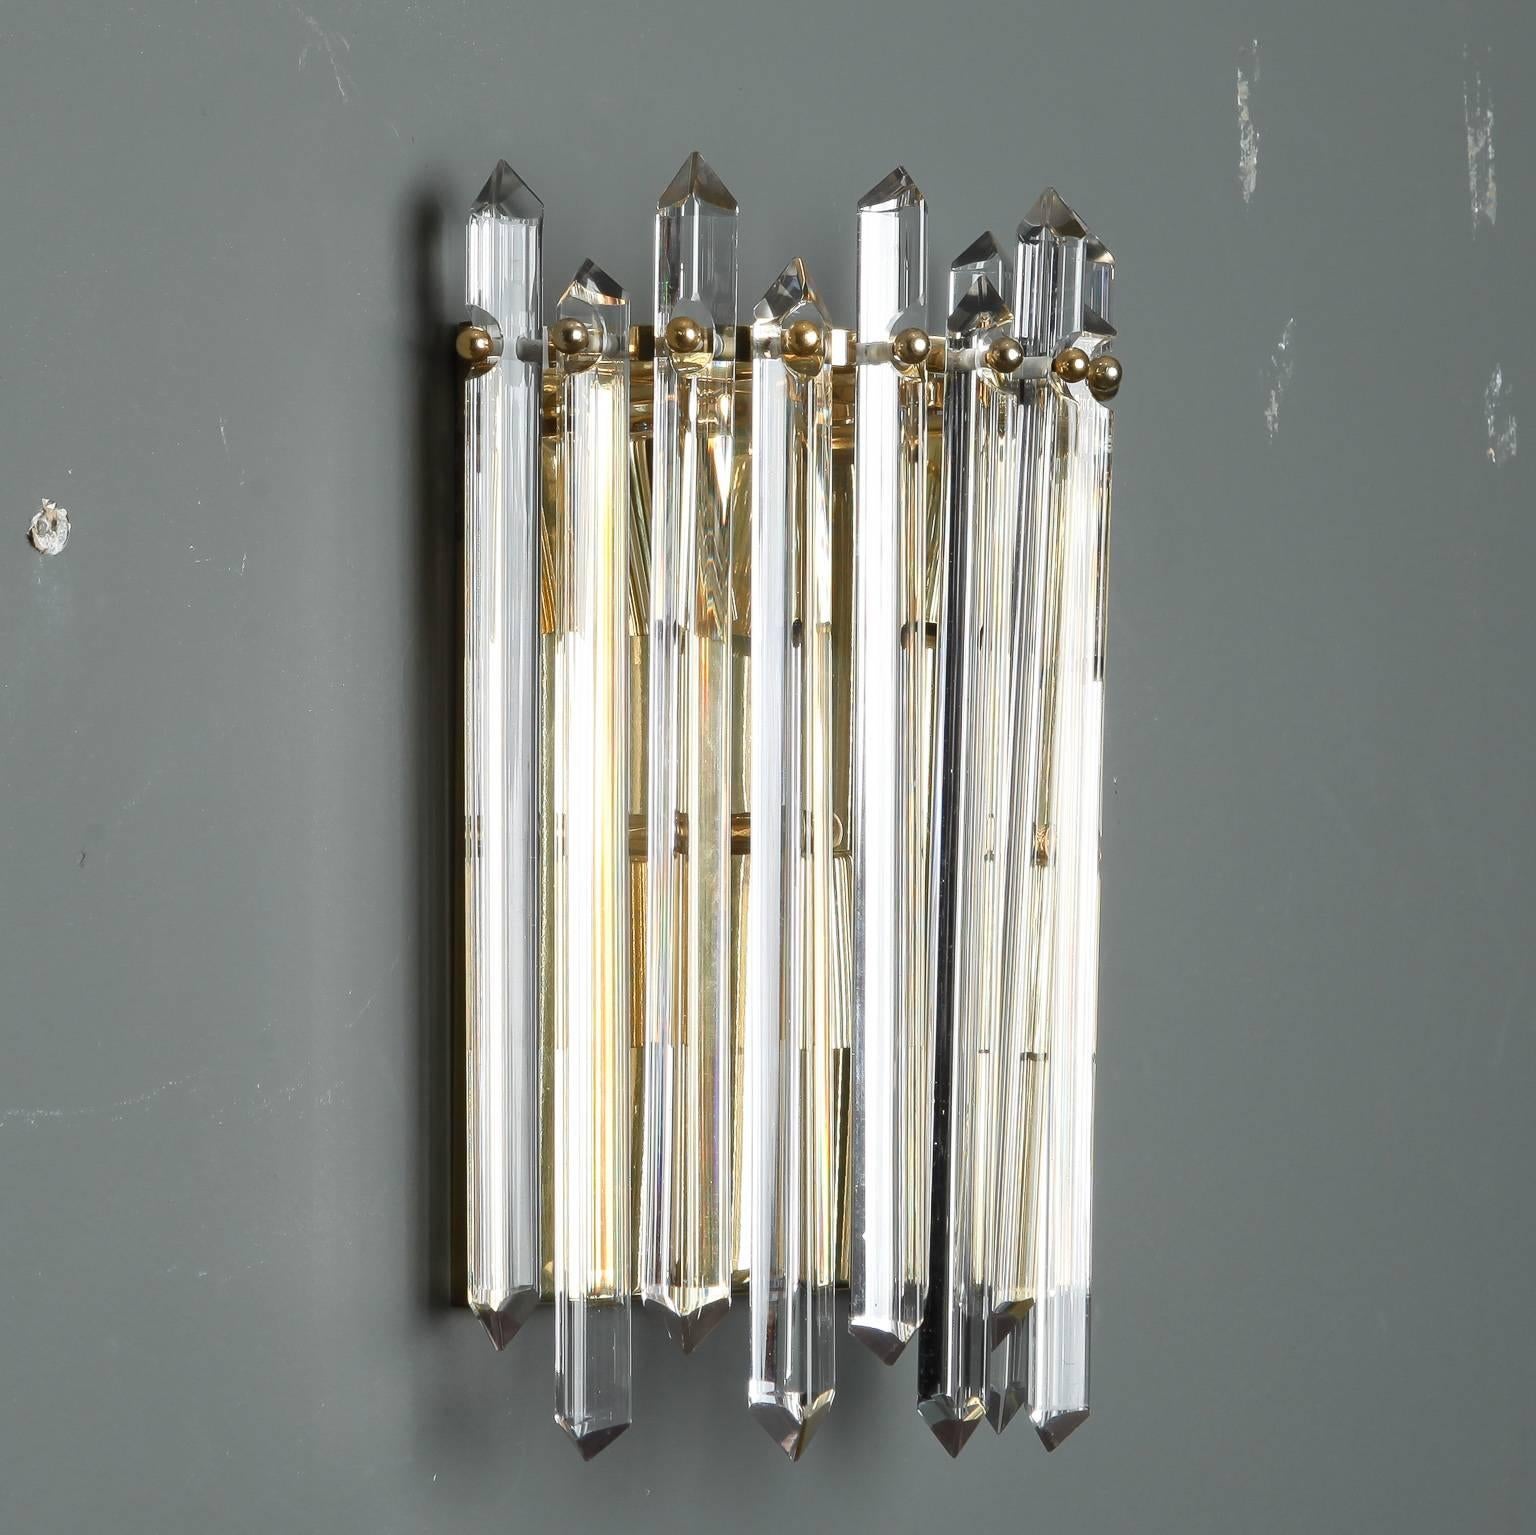 Pair of sconces with polished brass demilune shape base and cut crystal spears suspended at alternating lengths, circa 1970s. New wiring for US electrical standards. Sold and priced as a pair. Multiple pairs available.
